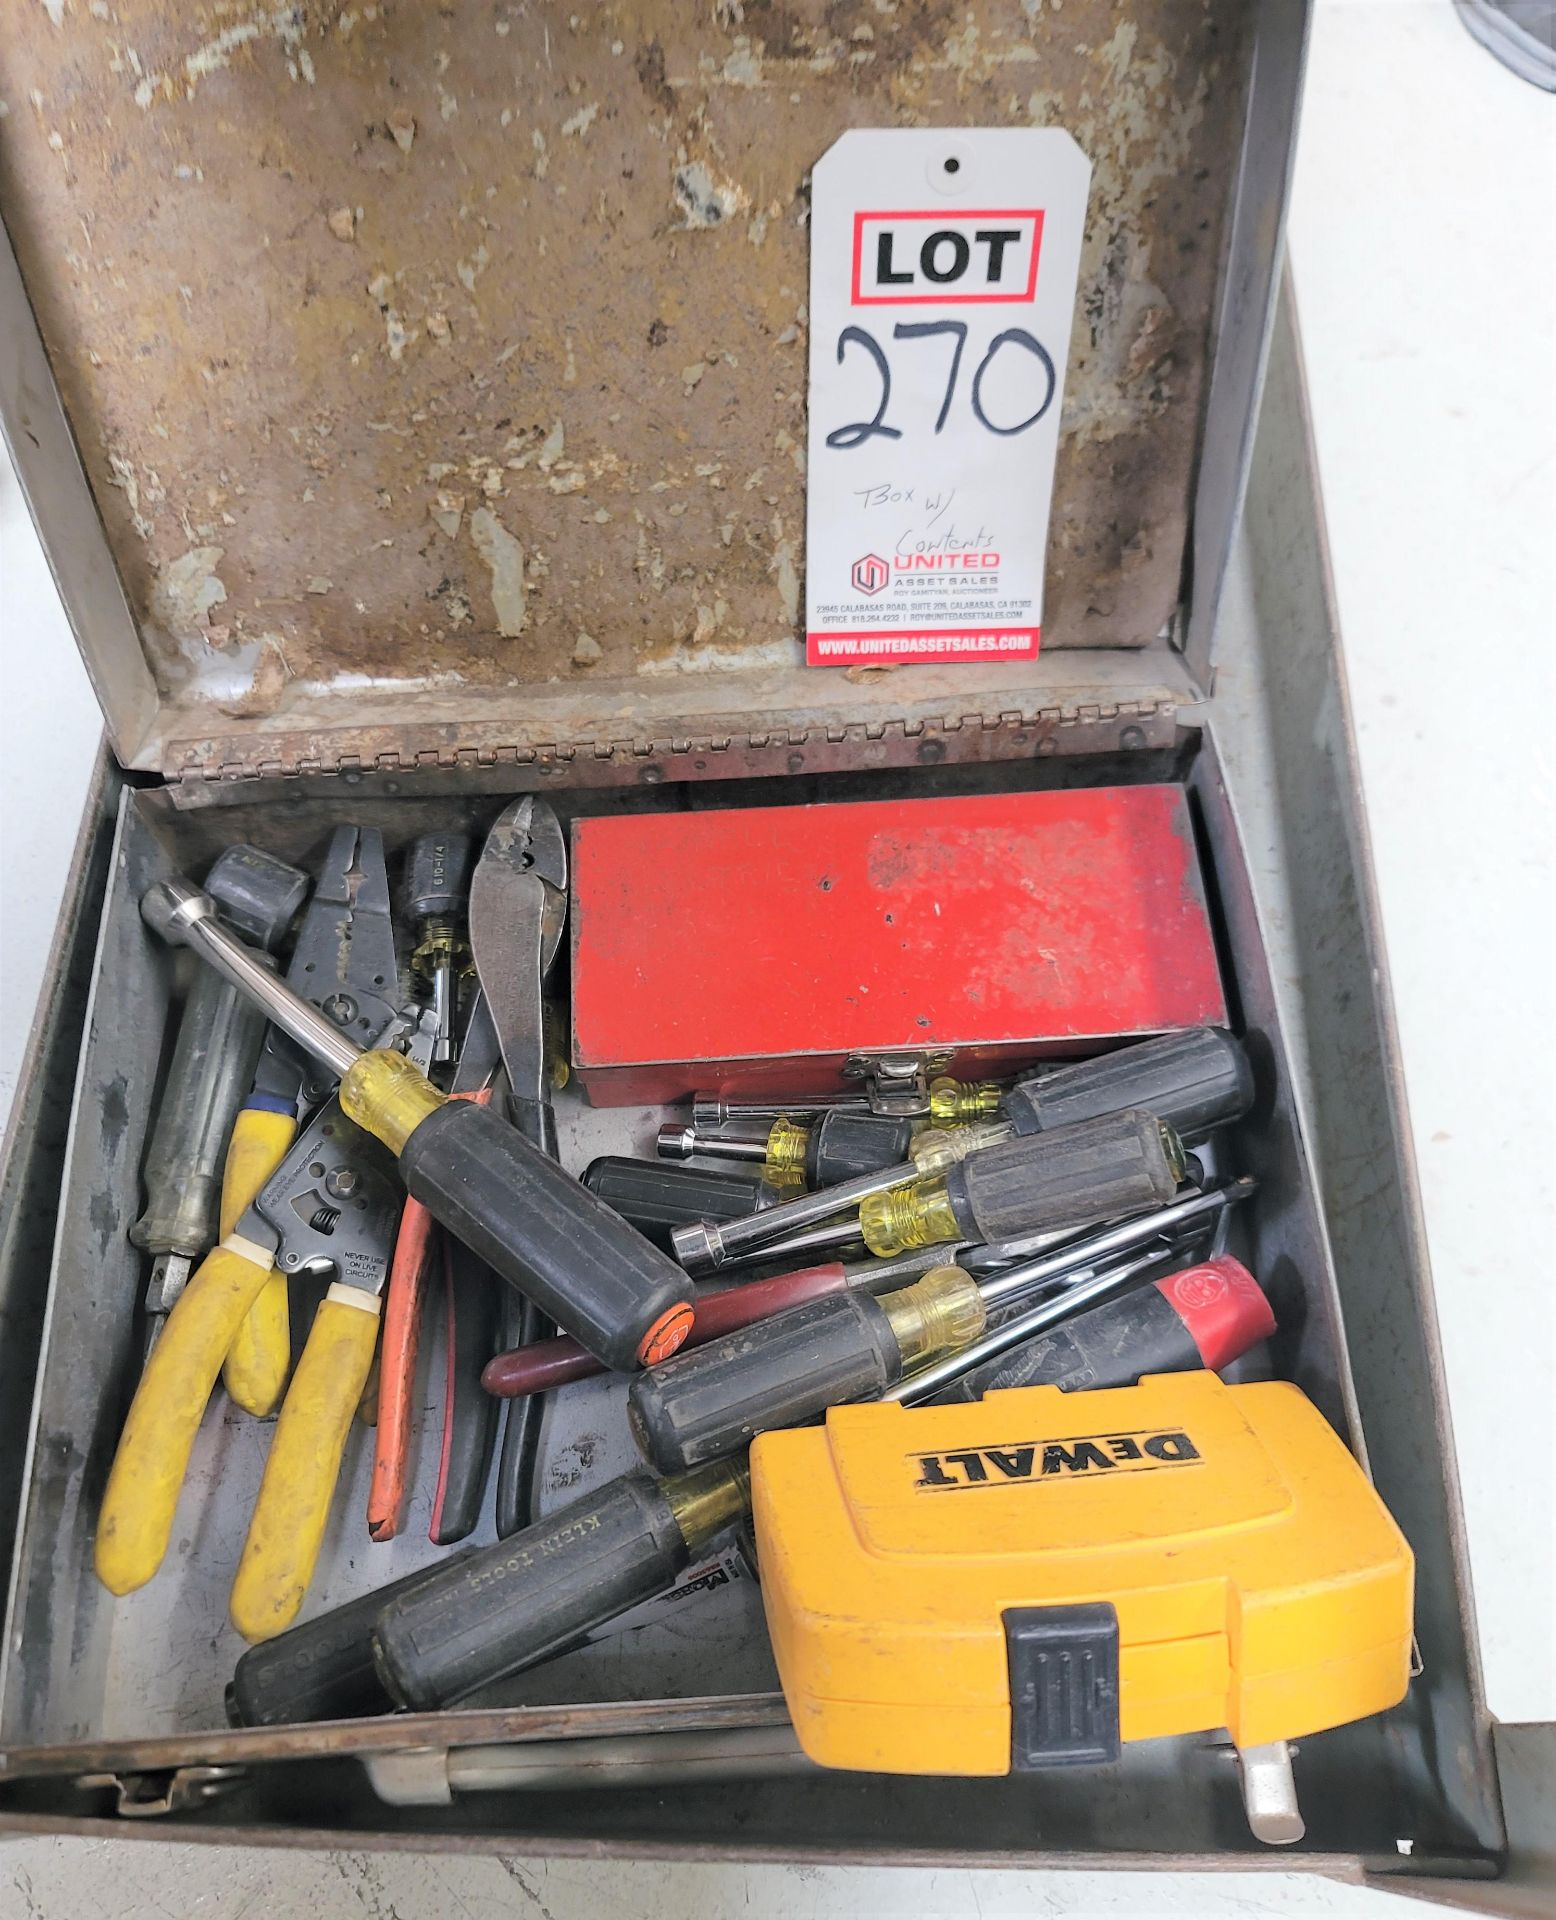 LOT - BOX OF HAND TOOLS: NUT DRIVERS, WIRE STRIPPERS, DRILL BITS, ETC.